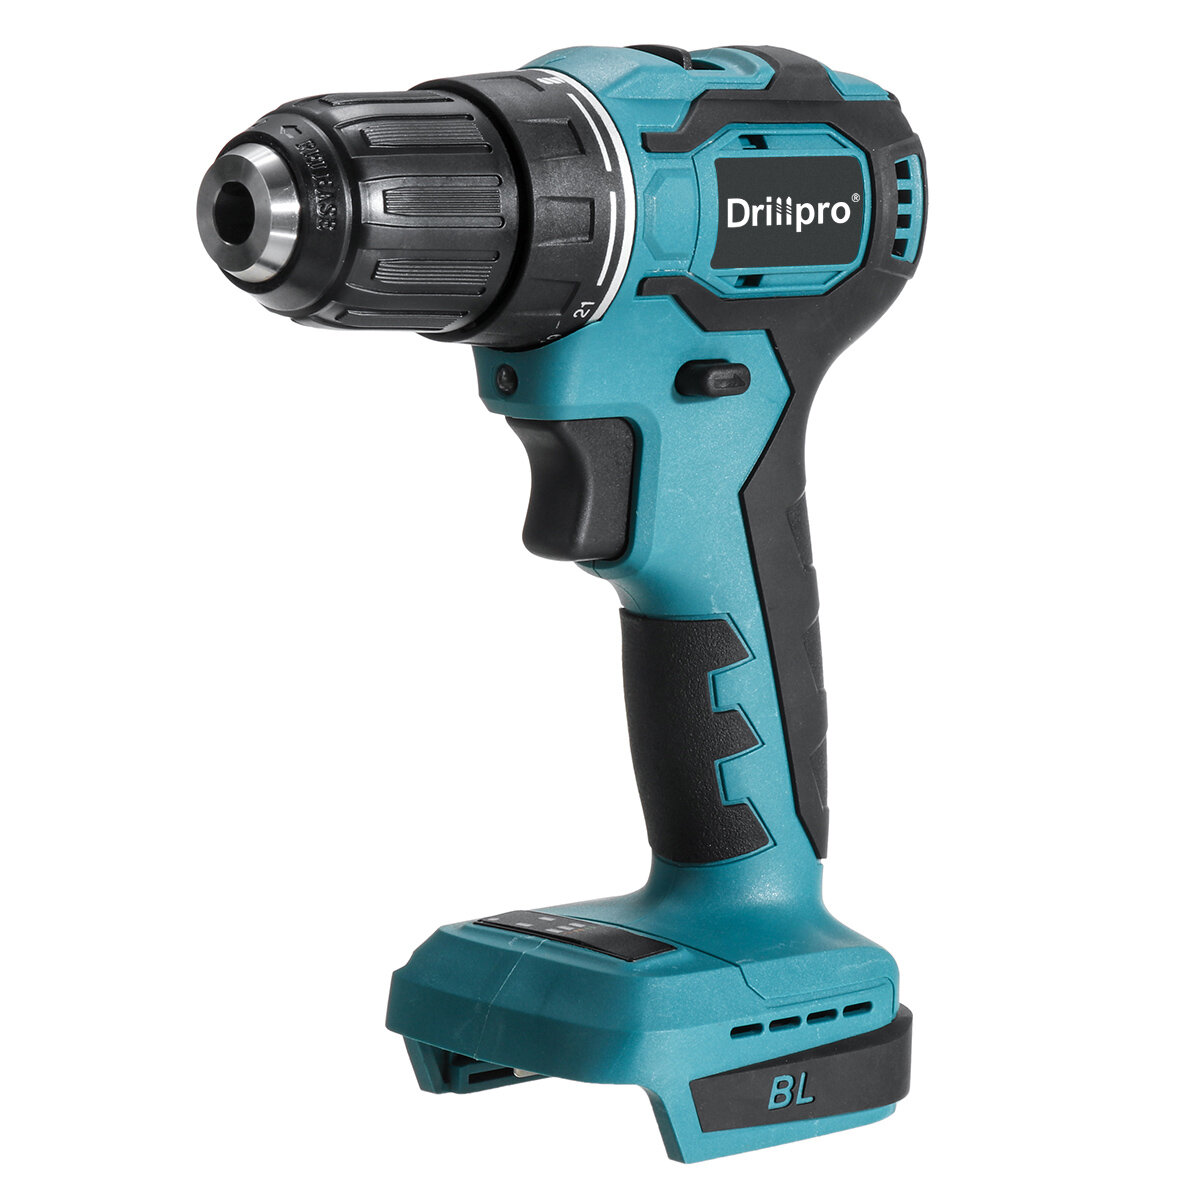 Image of Drillpro 10mm Cordless Electric Drill Screwdriver 1800rpm 2 Speed with LED Working Light 21+1 Stage Setting Mode